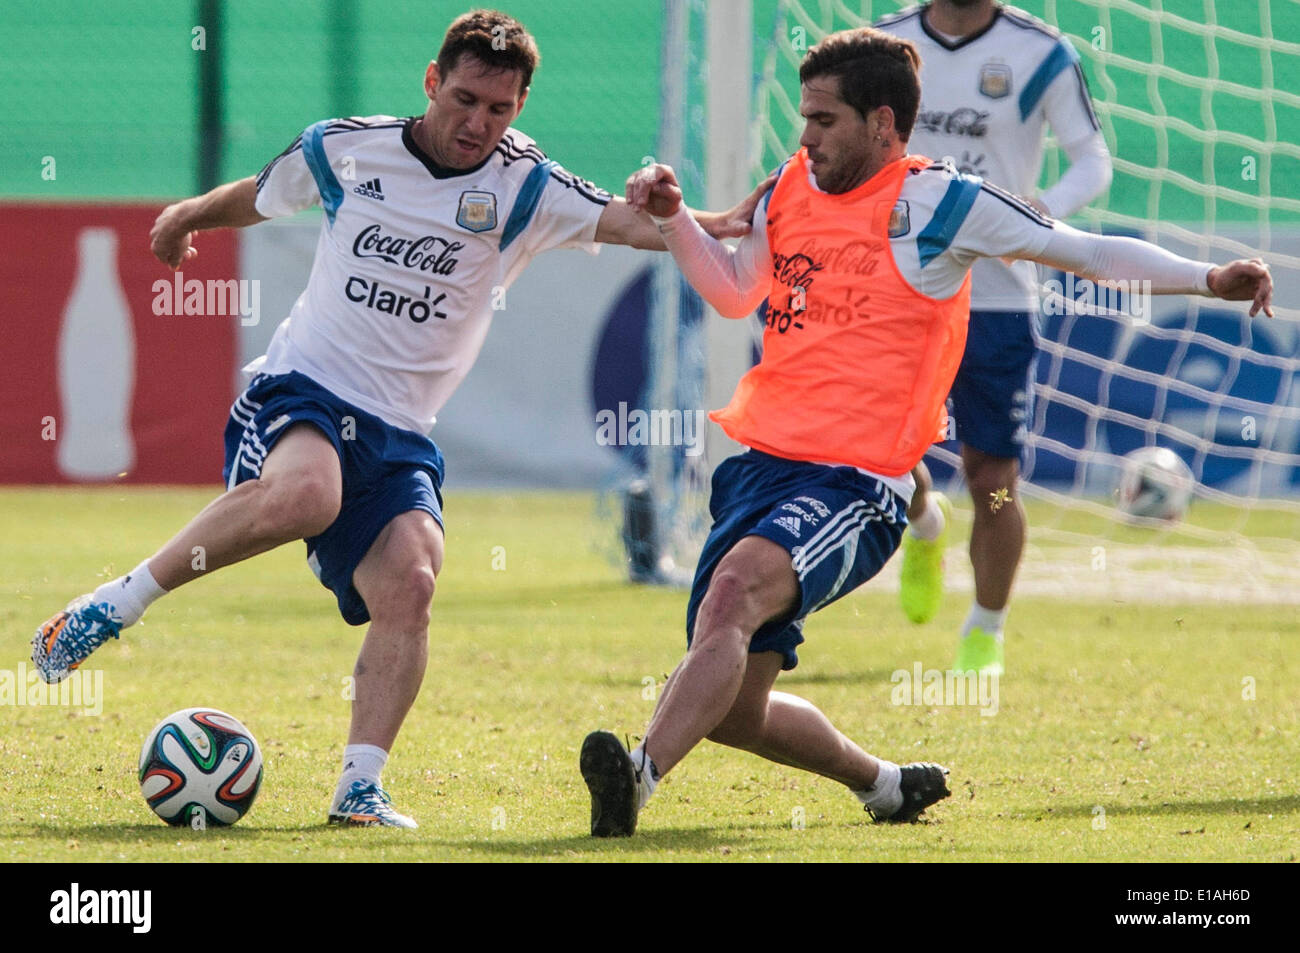 Ezeiza. 28th May, 2014. Argentina's national soccer team players Lionel Messi (L) and Fernando Gago take part in a training session in Ezeiza City May 28, 2014. Argentina will face Trinidad and Tobago and Slovenia in friendly matches prior to the FIFA World Cup Brazil 2014, to be held from June 12 to July 13. © Martin Zabala/Xinhua/Alamy Live News Stock Photo